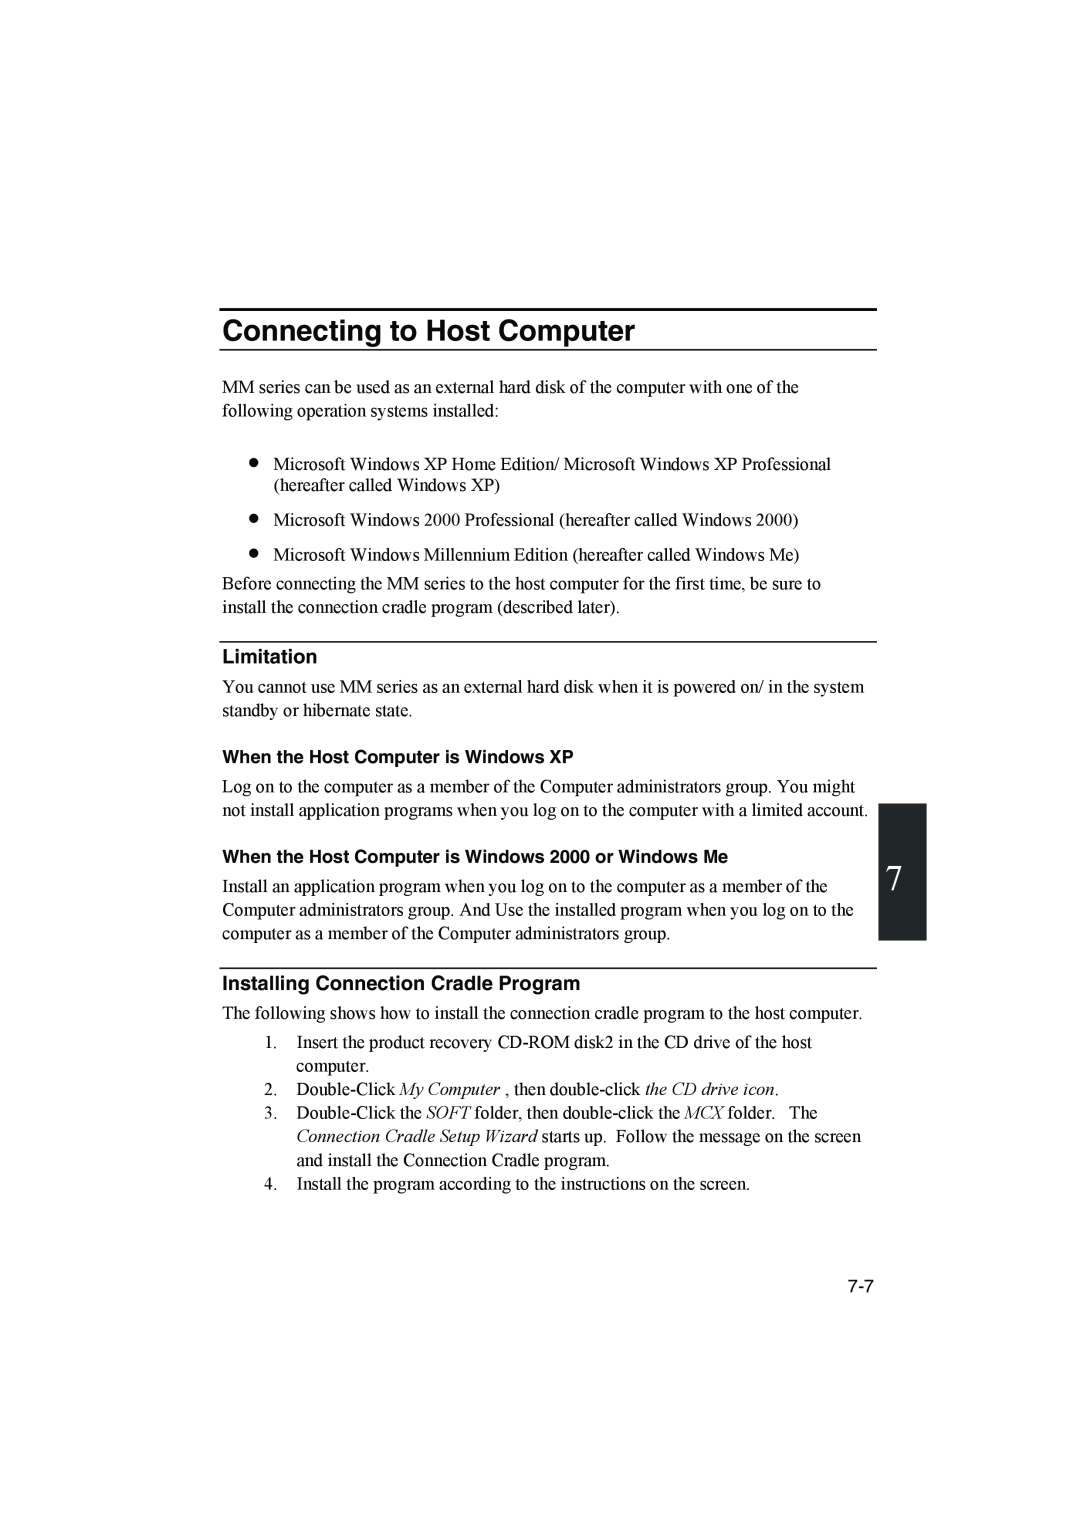 Sharp PC-MM1 manual Connecting to Host Computer, Limitation, Installing Connection Cradle Program 